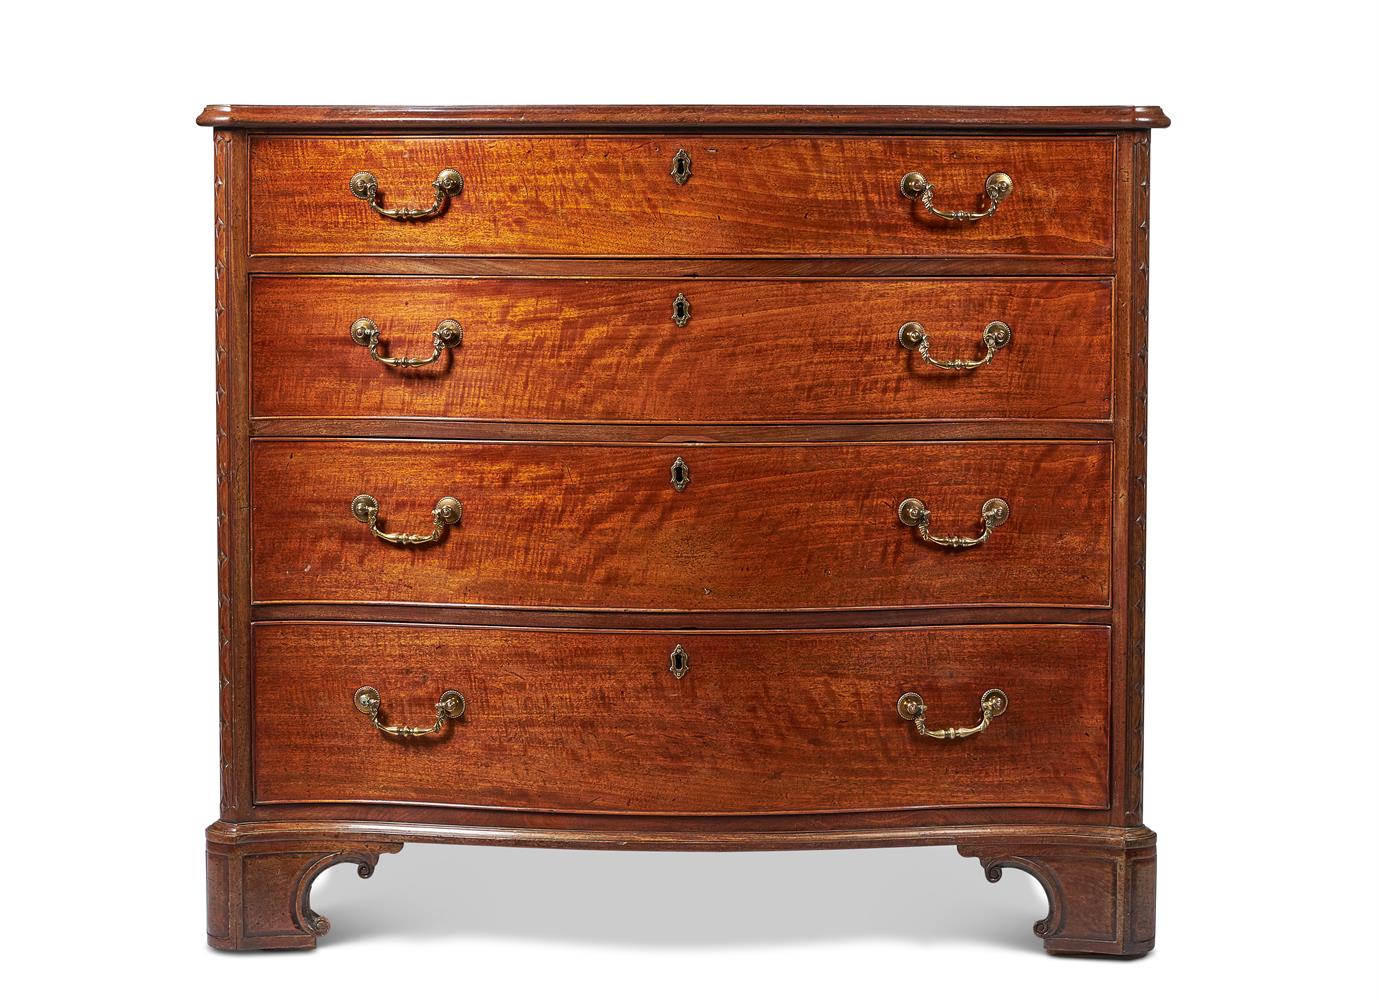 A GEORGE III MAHOGANY SERPENTINE COMMODE, IN THE MANNER OF THOMAS CHIPPENDALE, CIRCA 1765 - Image 2 of 11